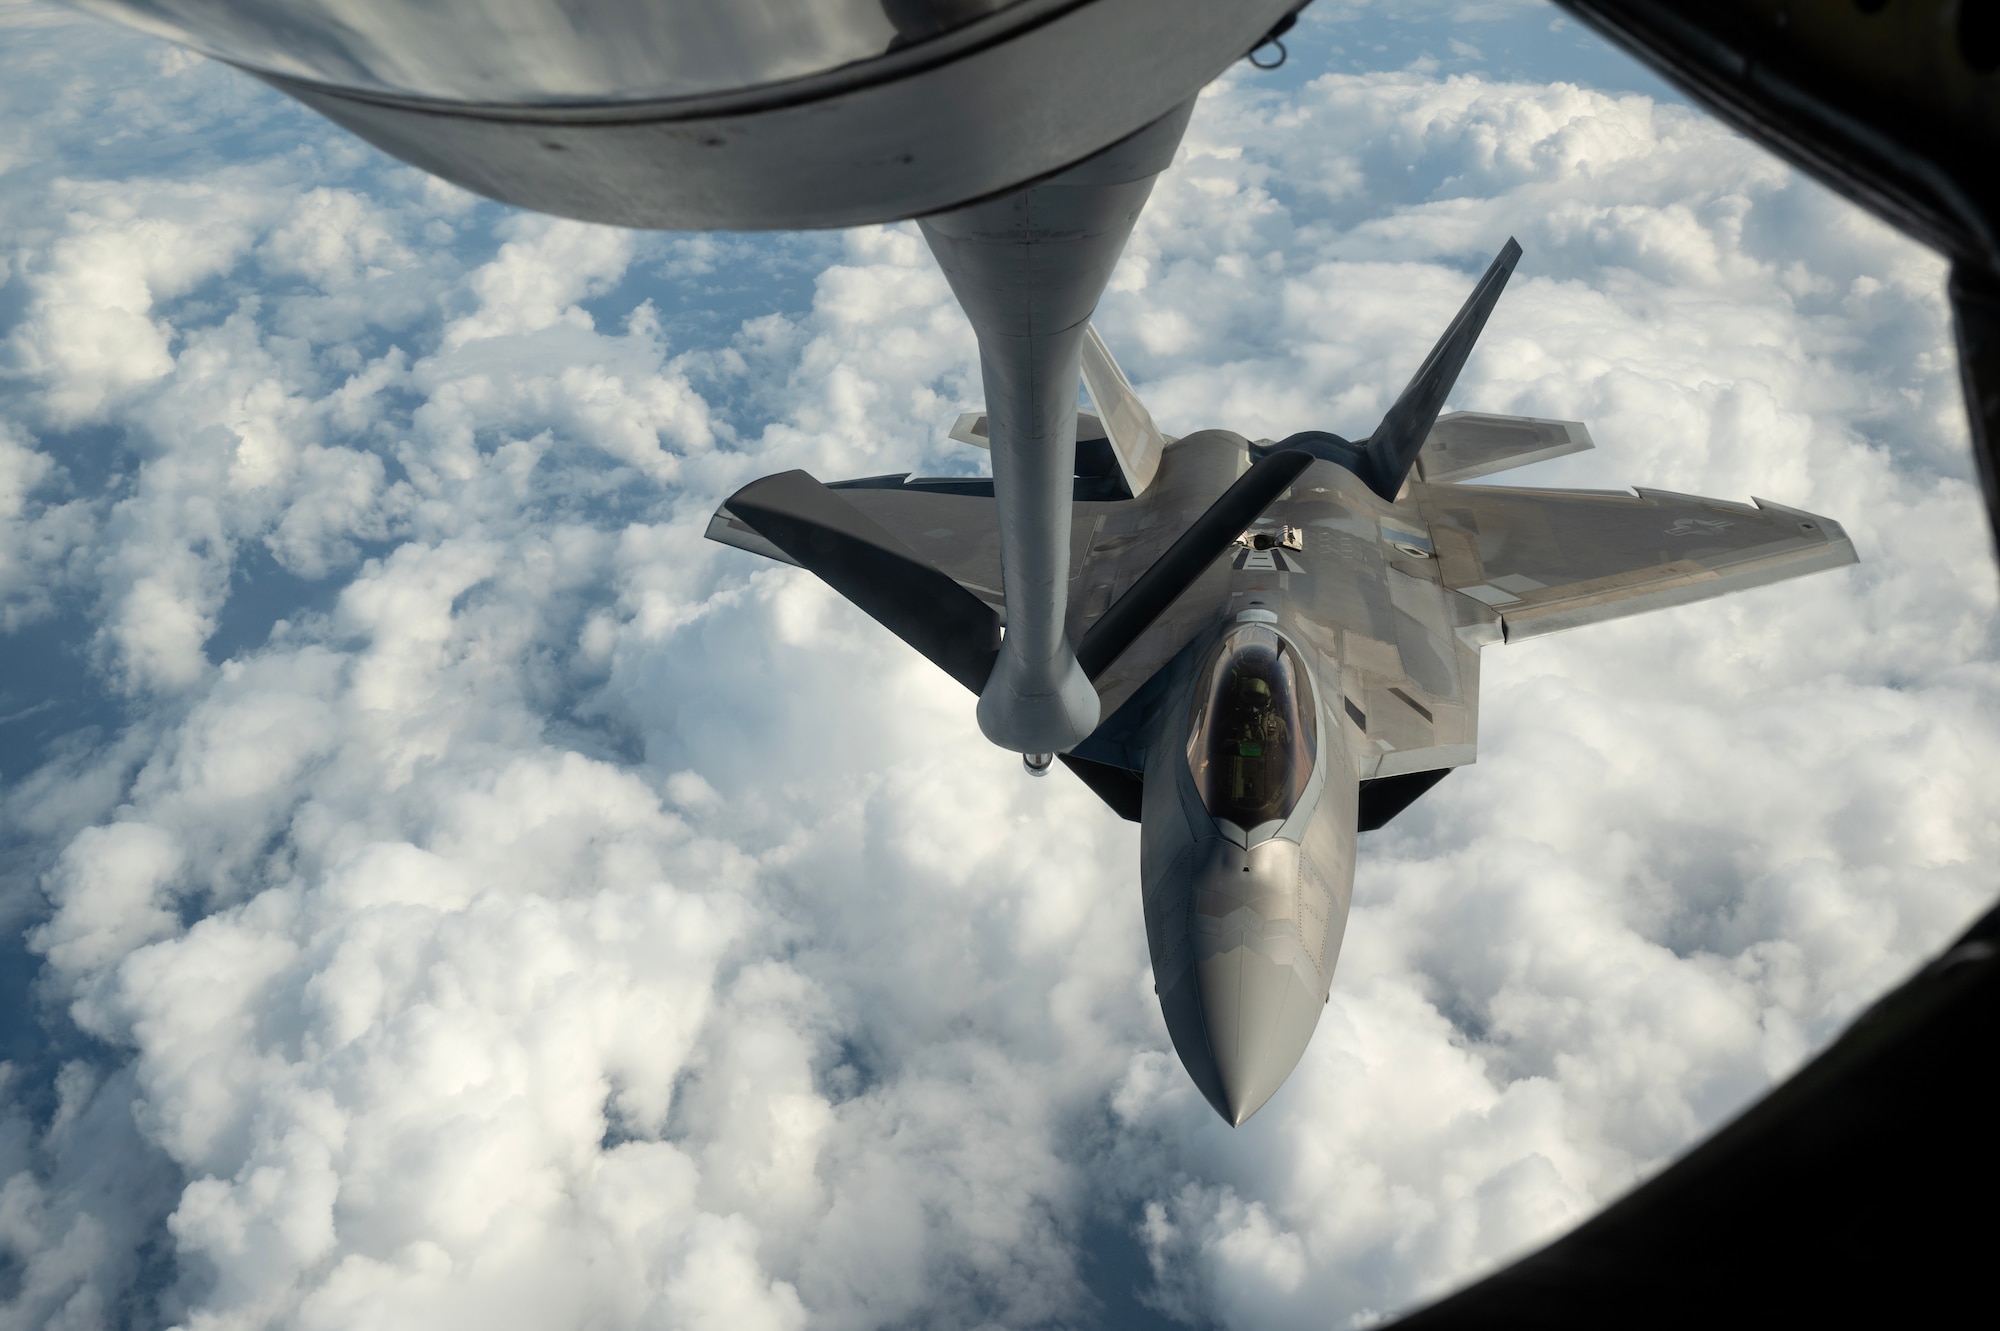 An F-22A Raptor assigned to the 525th Fighter Squadron flies approaches a KC-135 Stratotanker to receive aerial refueling over the South China Sea, March 13, 2023 in support of a subject matter expert exchange and bilateral training mission with the Philippine Air Force. By strengthening partnerships through bilateral engagements with key Allies like the Philippines, PACAF enhances a networked security architecture capable of deterring common threats, protecting shared resources and upholding sovereignty throughout the Indo-Pacific region. (U.S. Air Force photo by Senior Airman Jessi Roth)